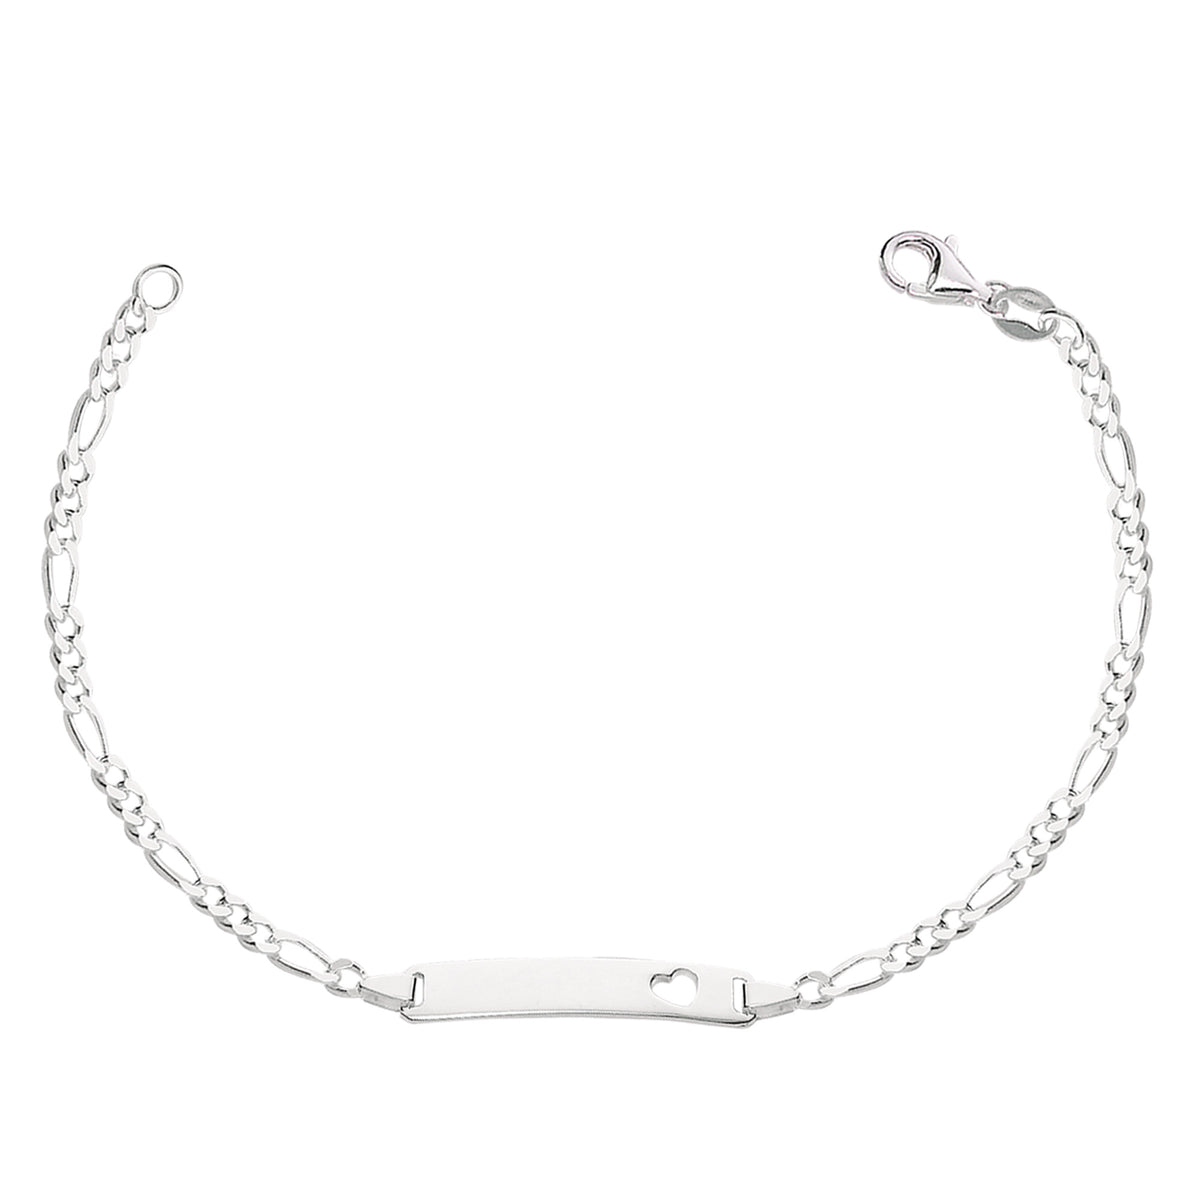 Figaro Chain Baby Id Bracelet In Sterling Silver - 6 Inches fine designer jewelry for men and women